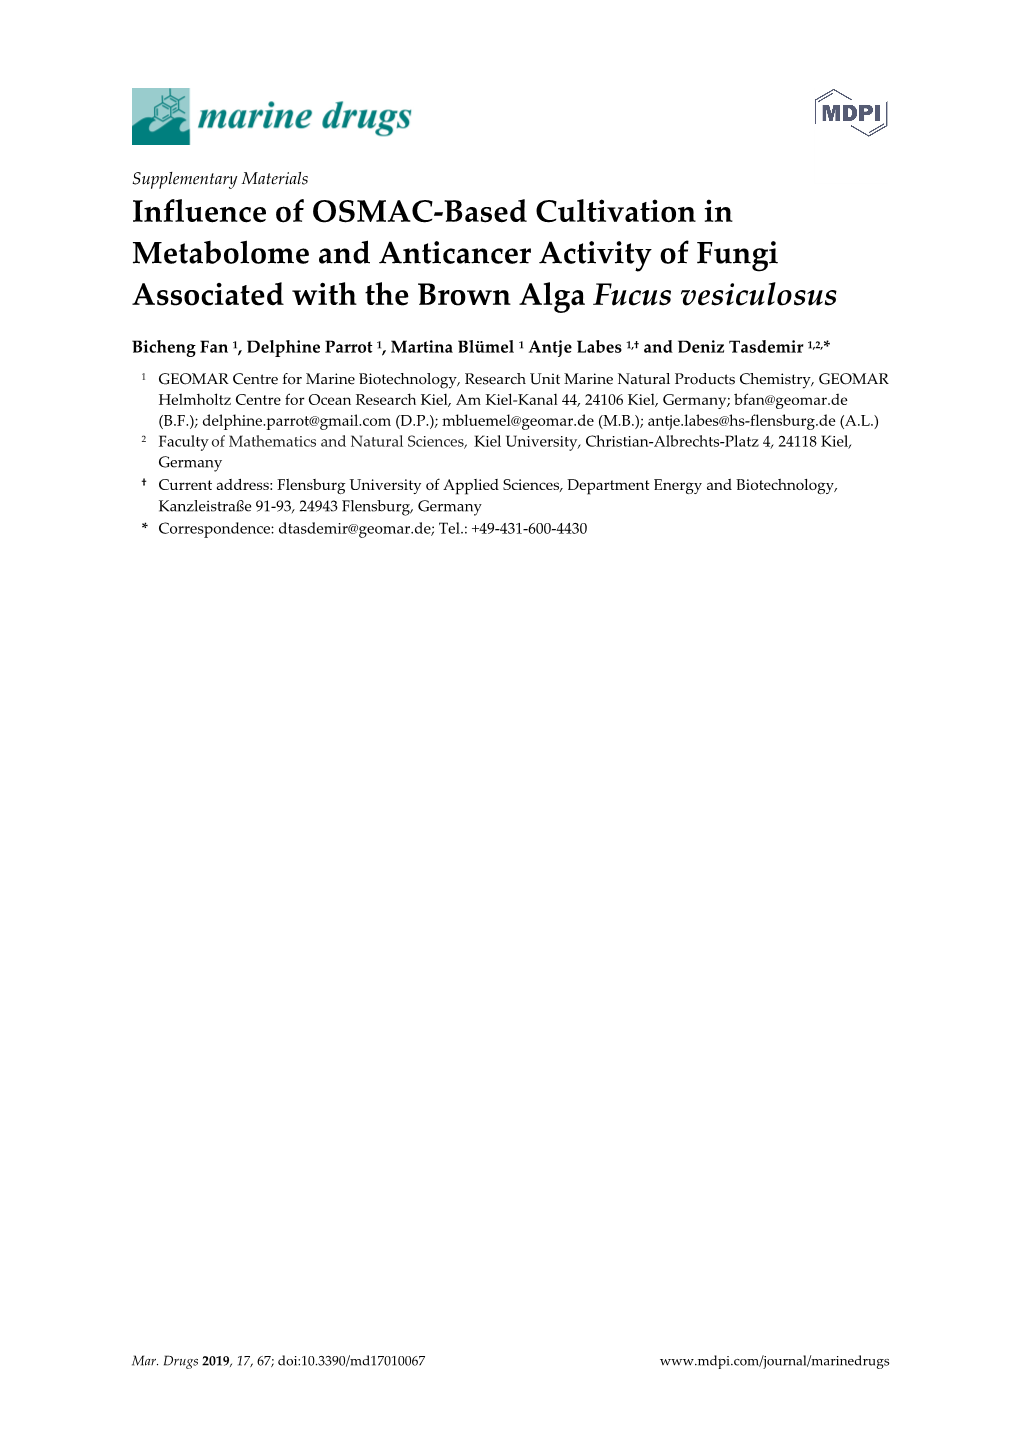 Influence of OSMAC-Based Cultivation in Metabolome and Anticancer Activity of Fungi Associated with the Brown Alga Fucus Vesiculosus